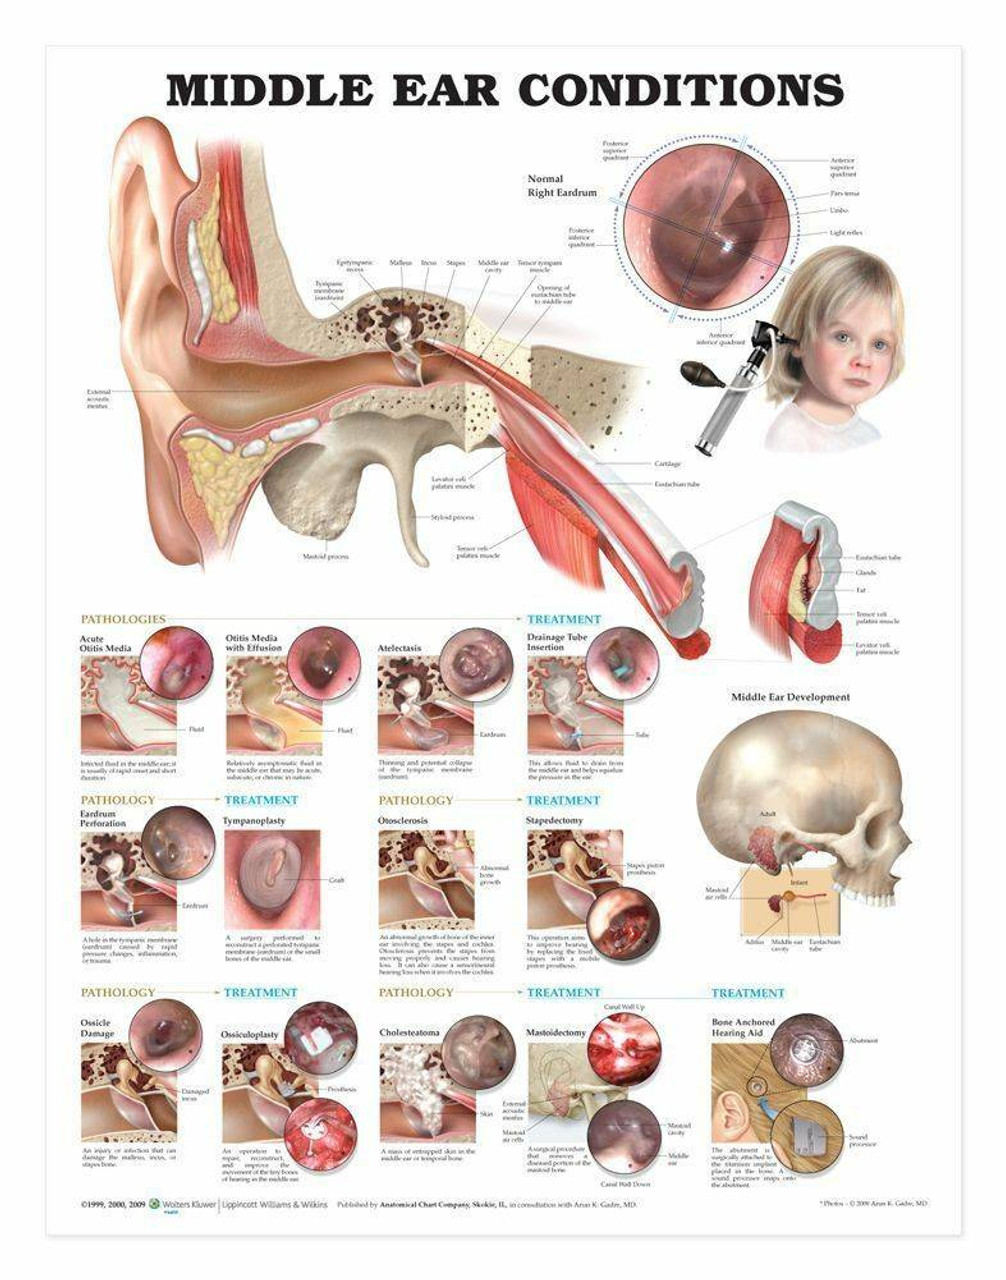 Stapedectomy of the Stapes of the Ear - Labelled – Medical Stock